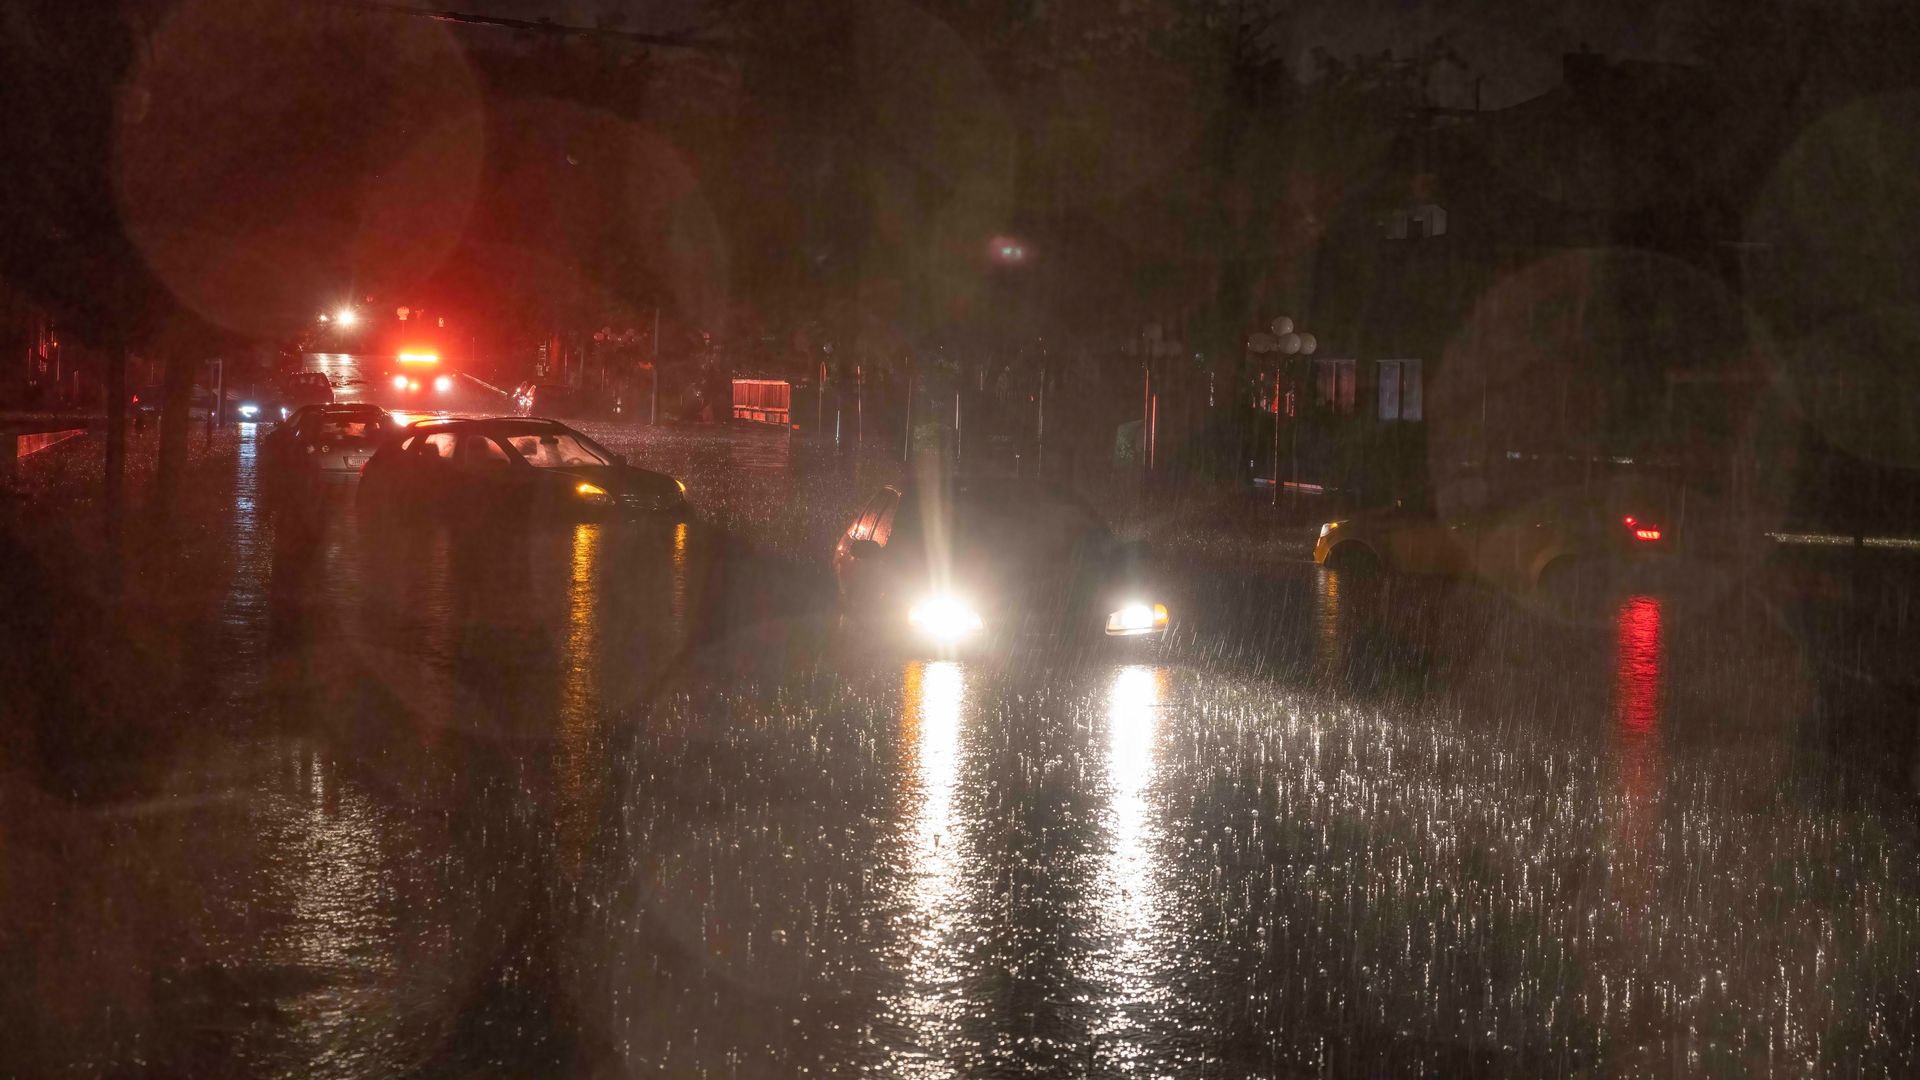 Cars are stranded in water as Fourth Street is covered in water between Grant and Dunn after a flash flood Friday night, which left a large portion of downtown flooded